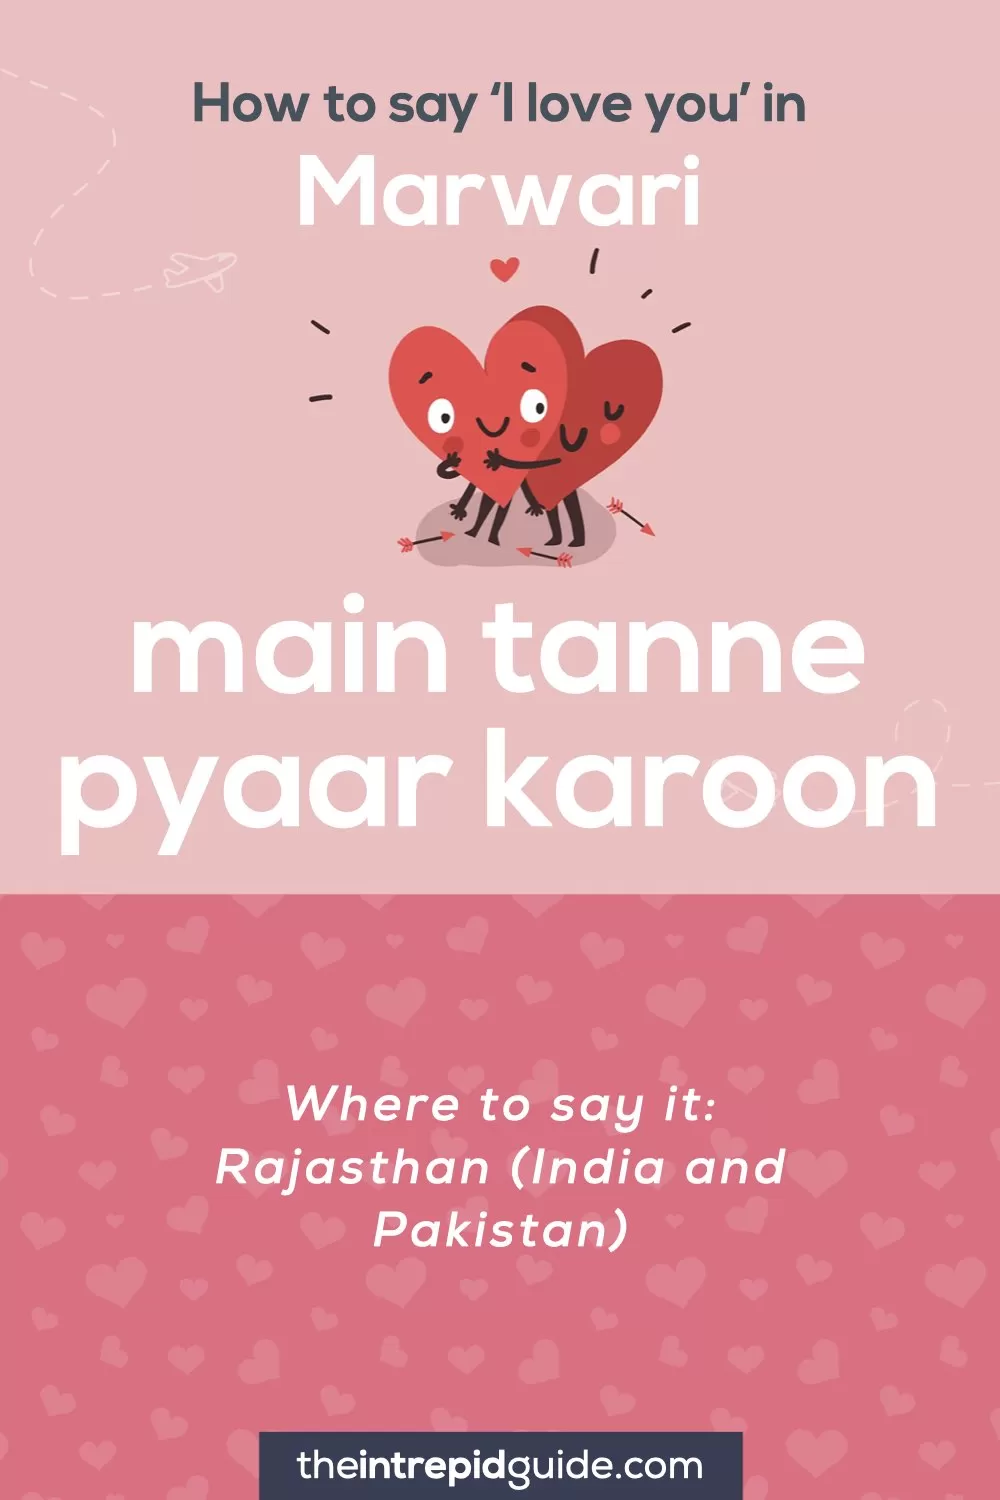 How to say I love you in different languages - Marwari - main tanne pyaar karoon